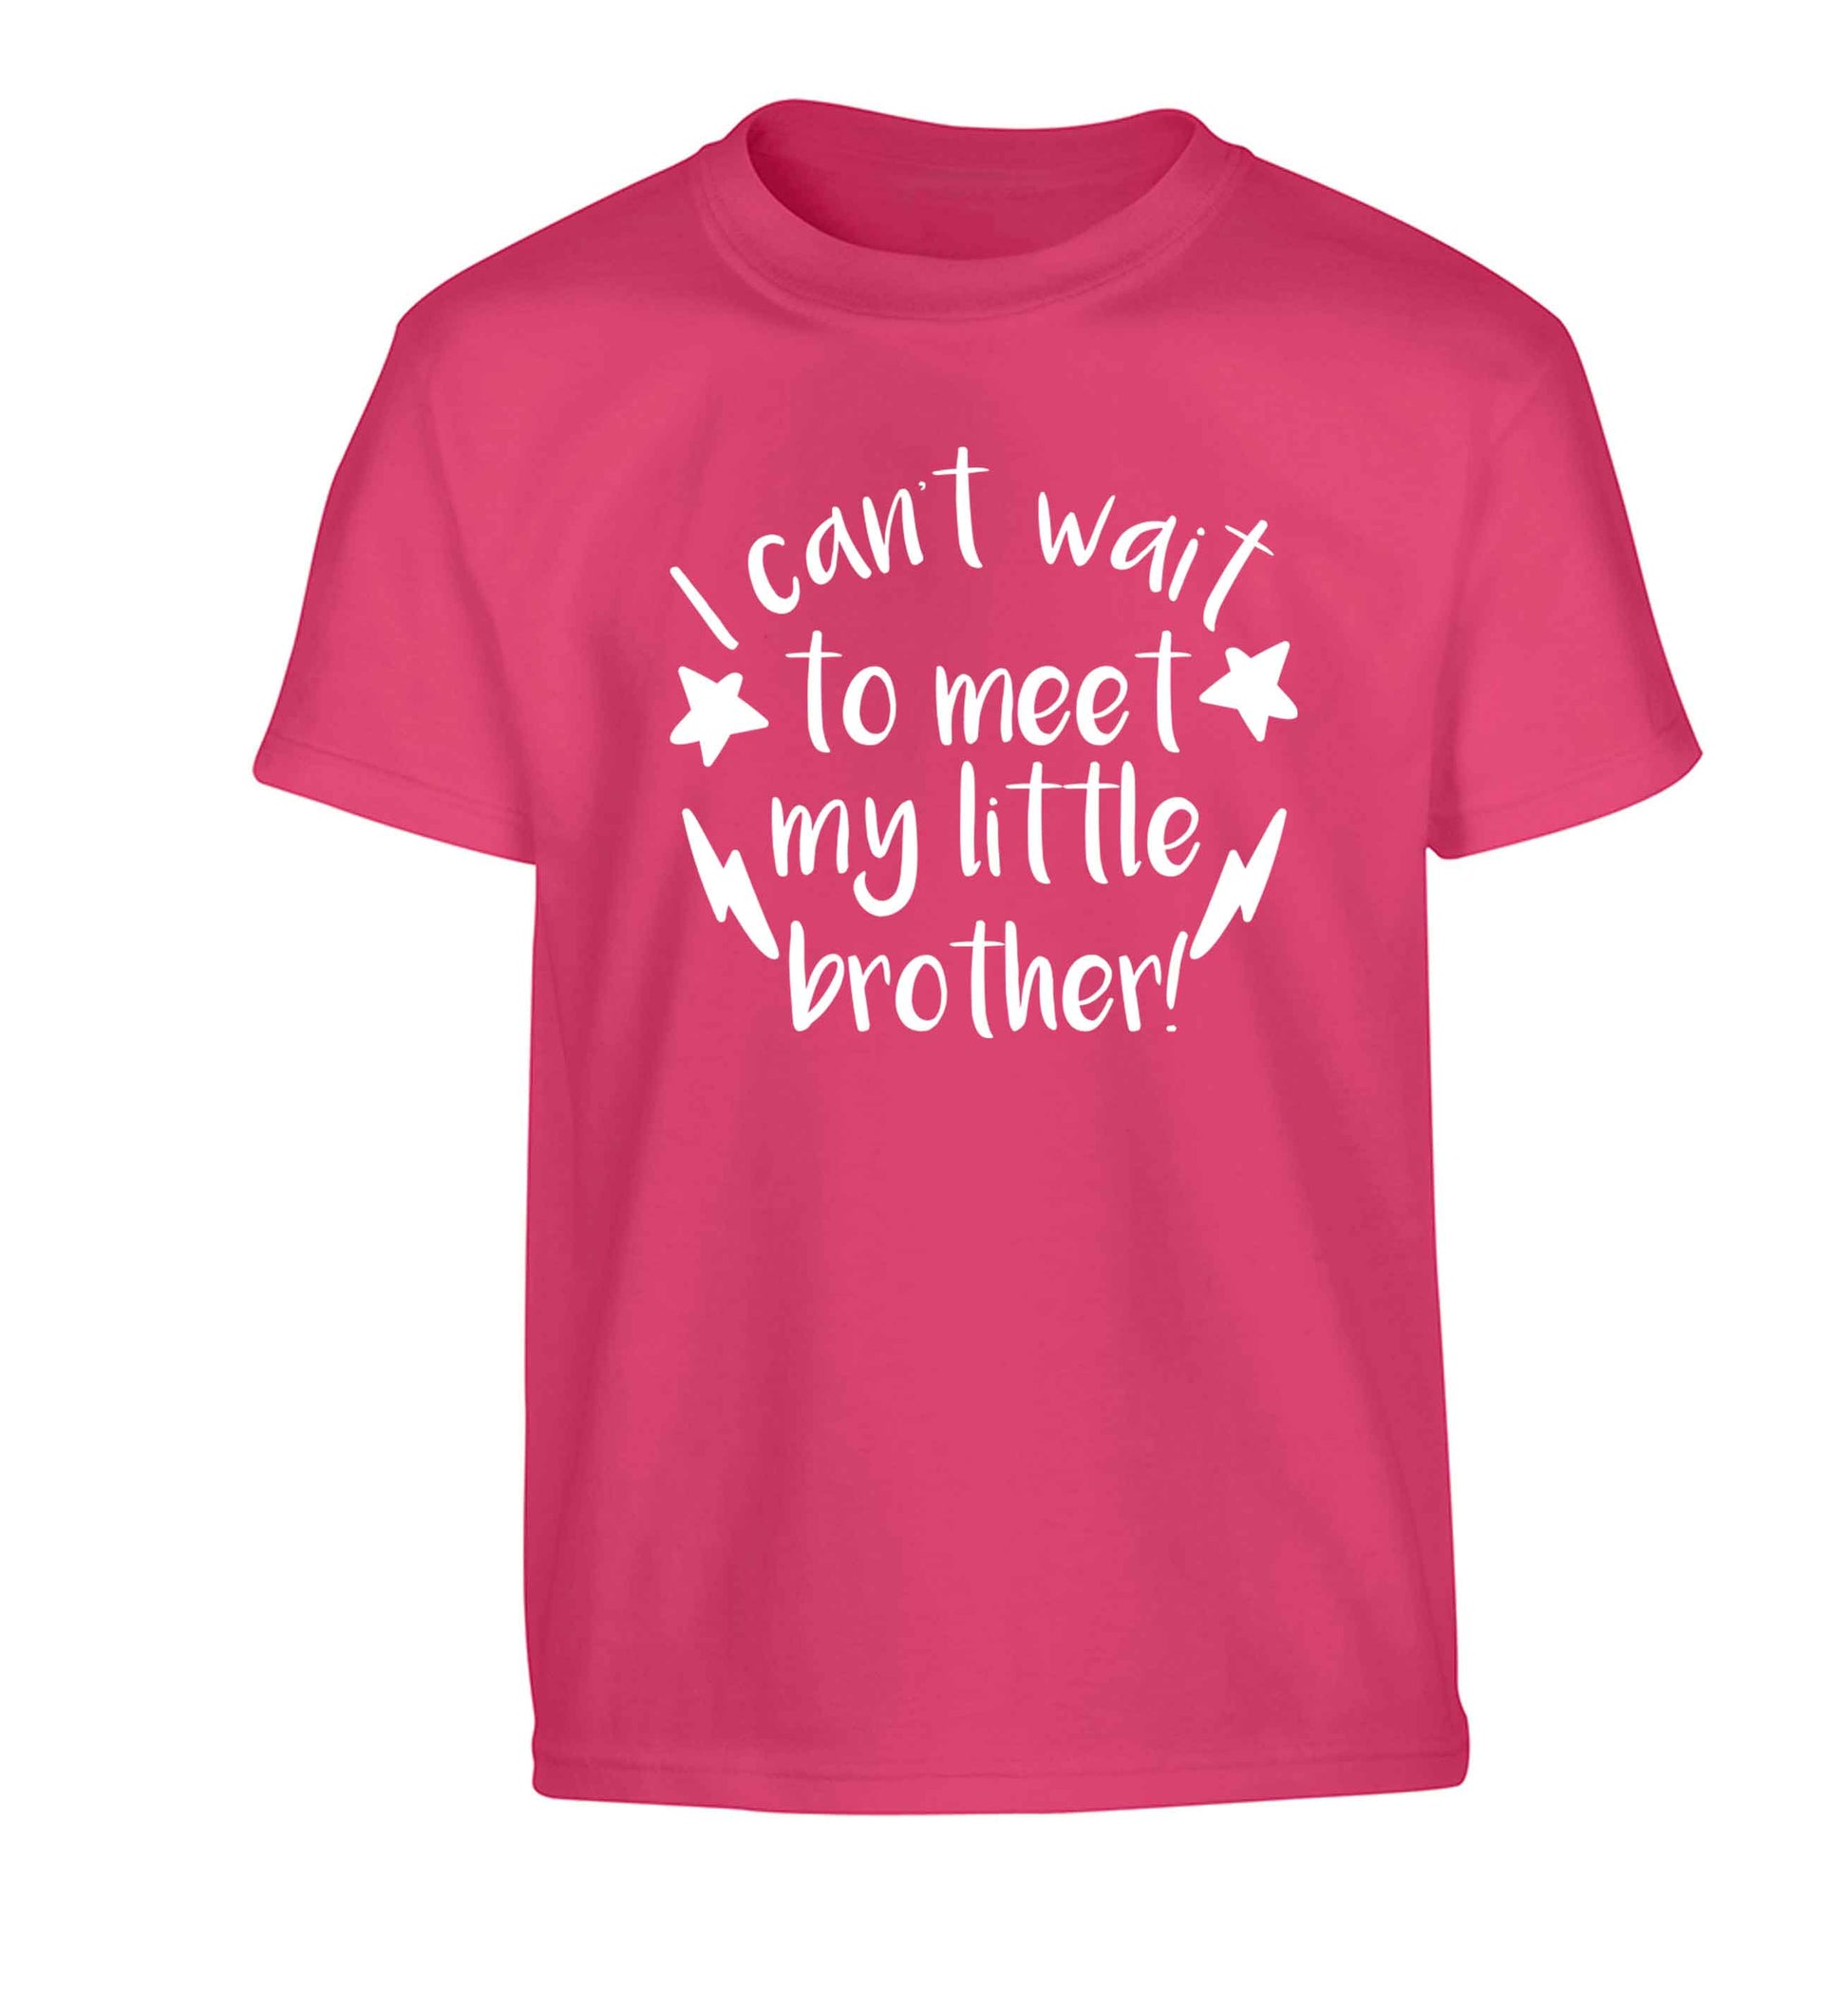 I can't wait to meet my sister! Children's pink Tshirt 12-13 Years